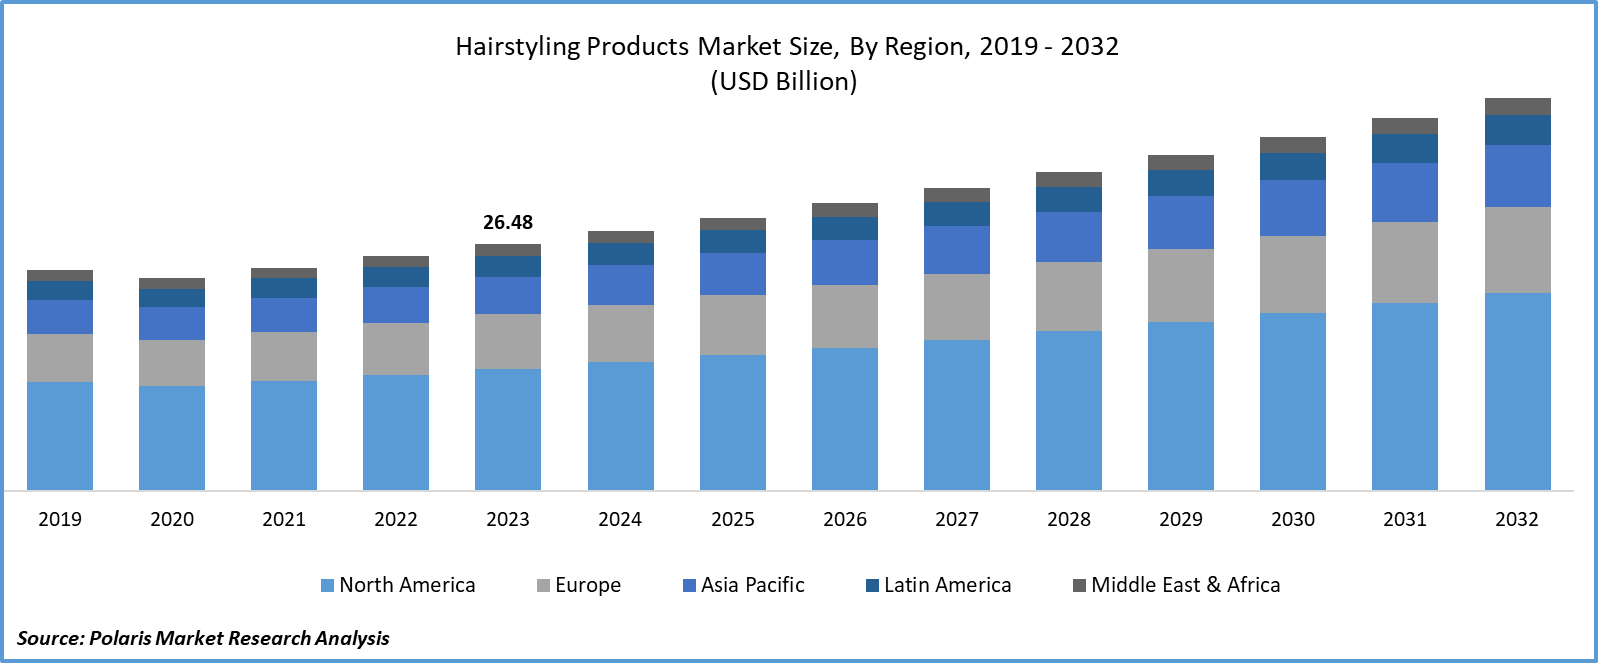 Hairstyling Products Market Size